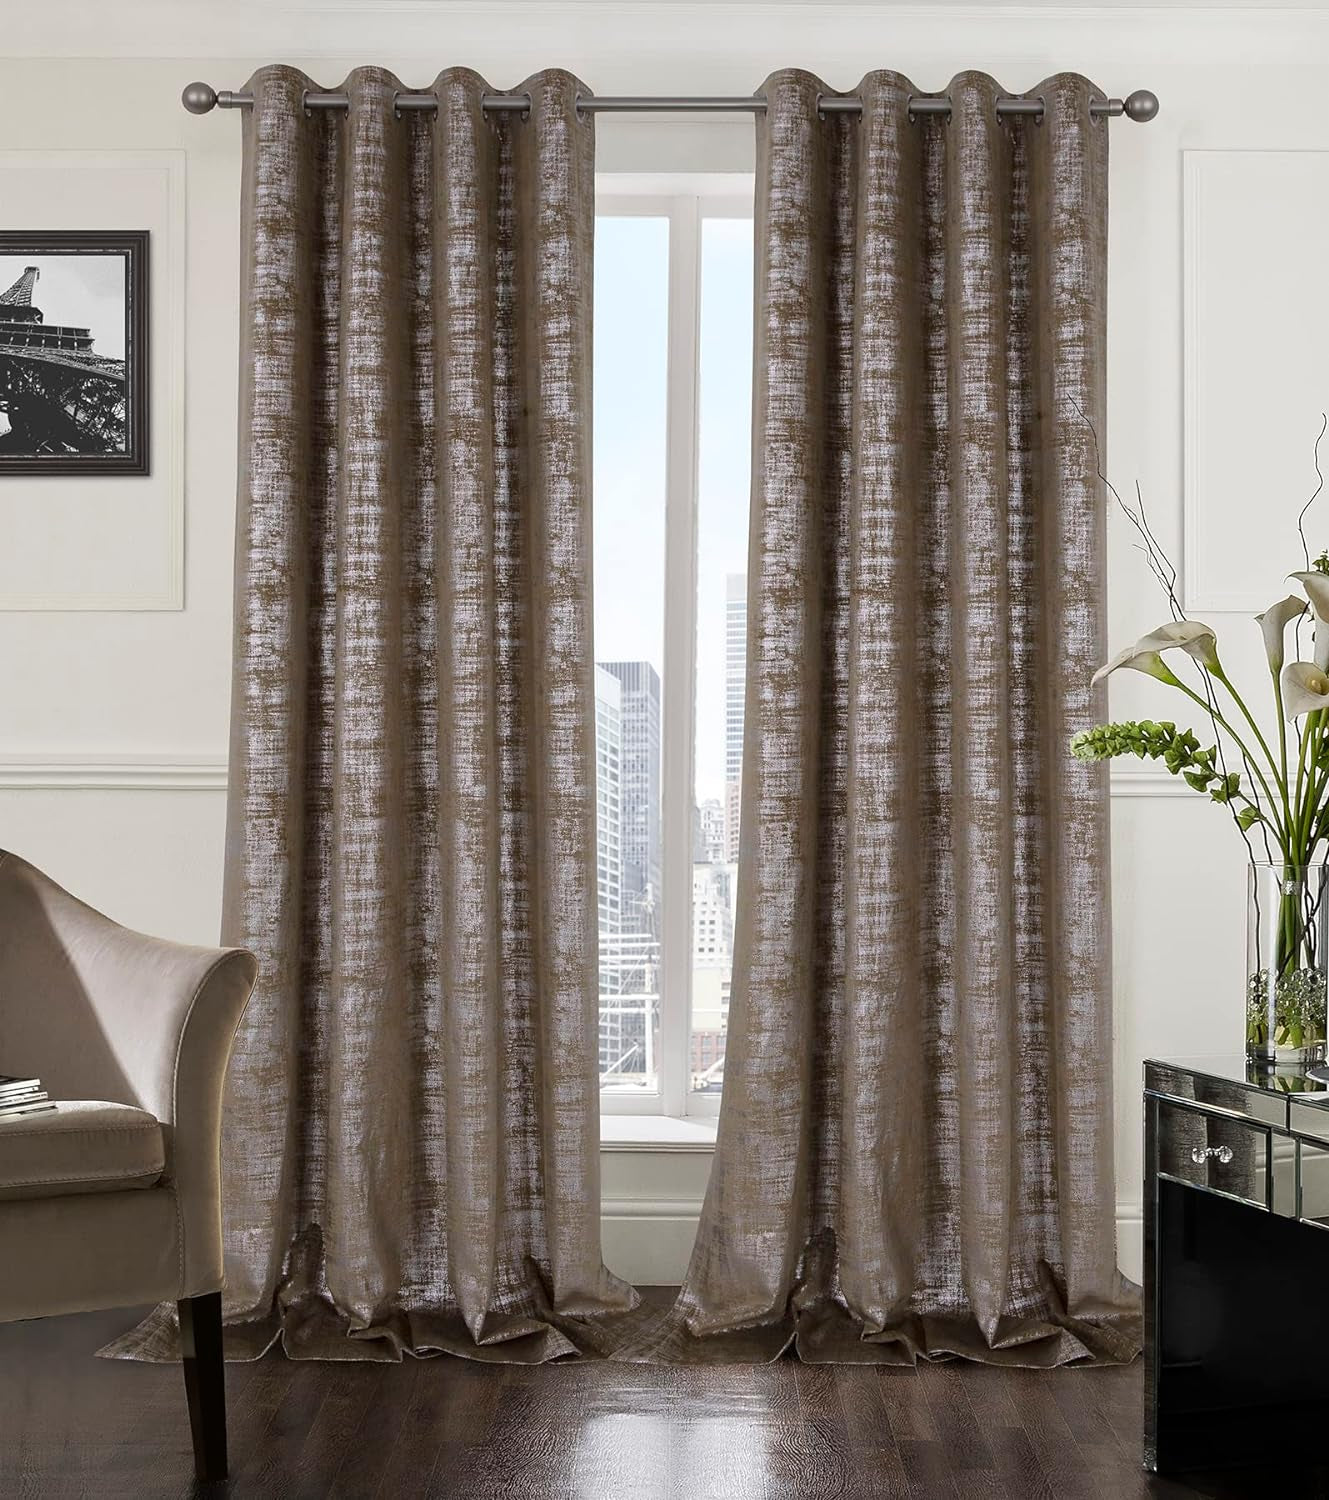 Always4U Soft Velvet Curtains 95 Inch Length Luxury Bedroom Curtains Gold Foil Print Window Curtains for Living Room 1 Panel White  always4u Mocha (Silver Print) 2 Panels: 52''W*108''L 